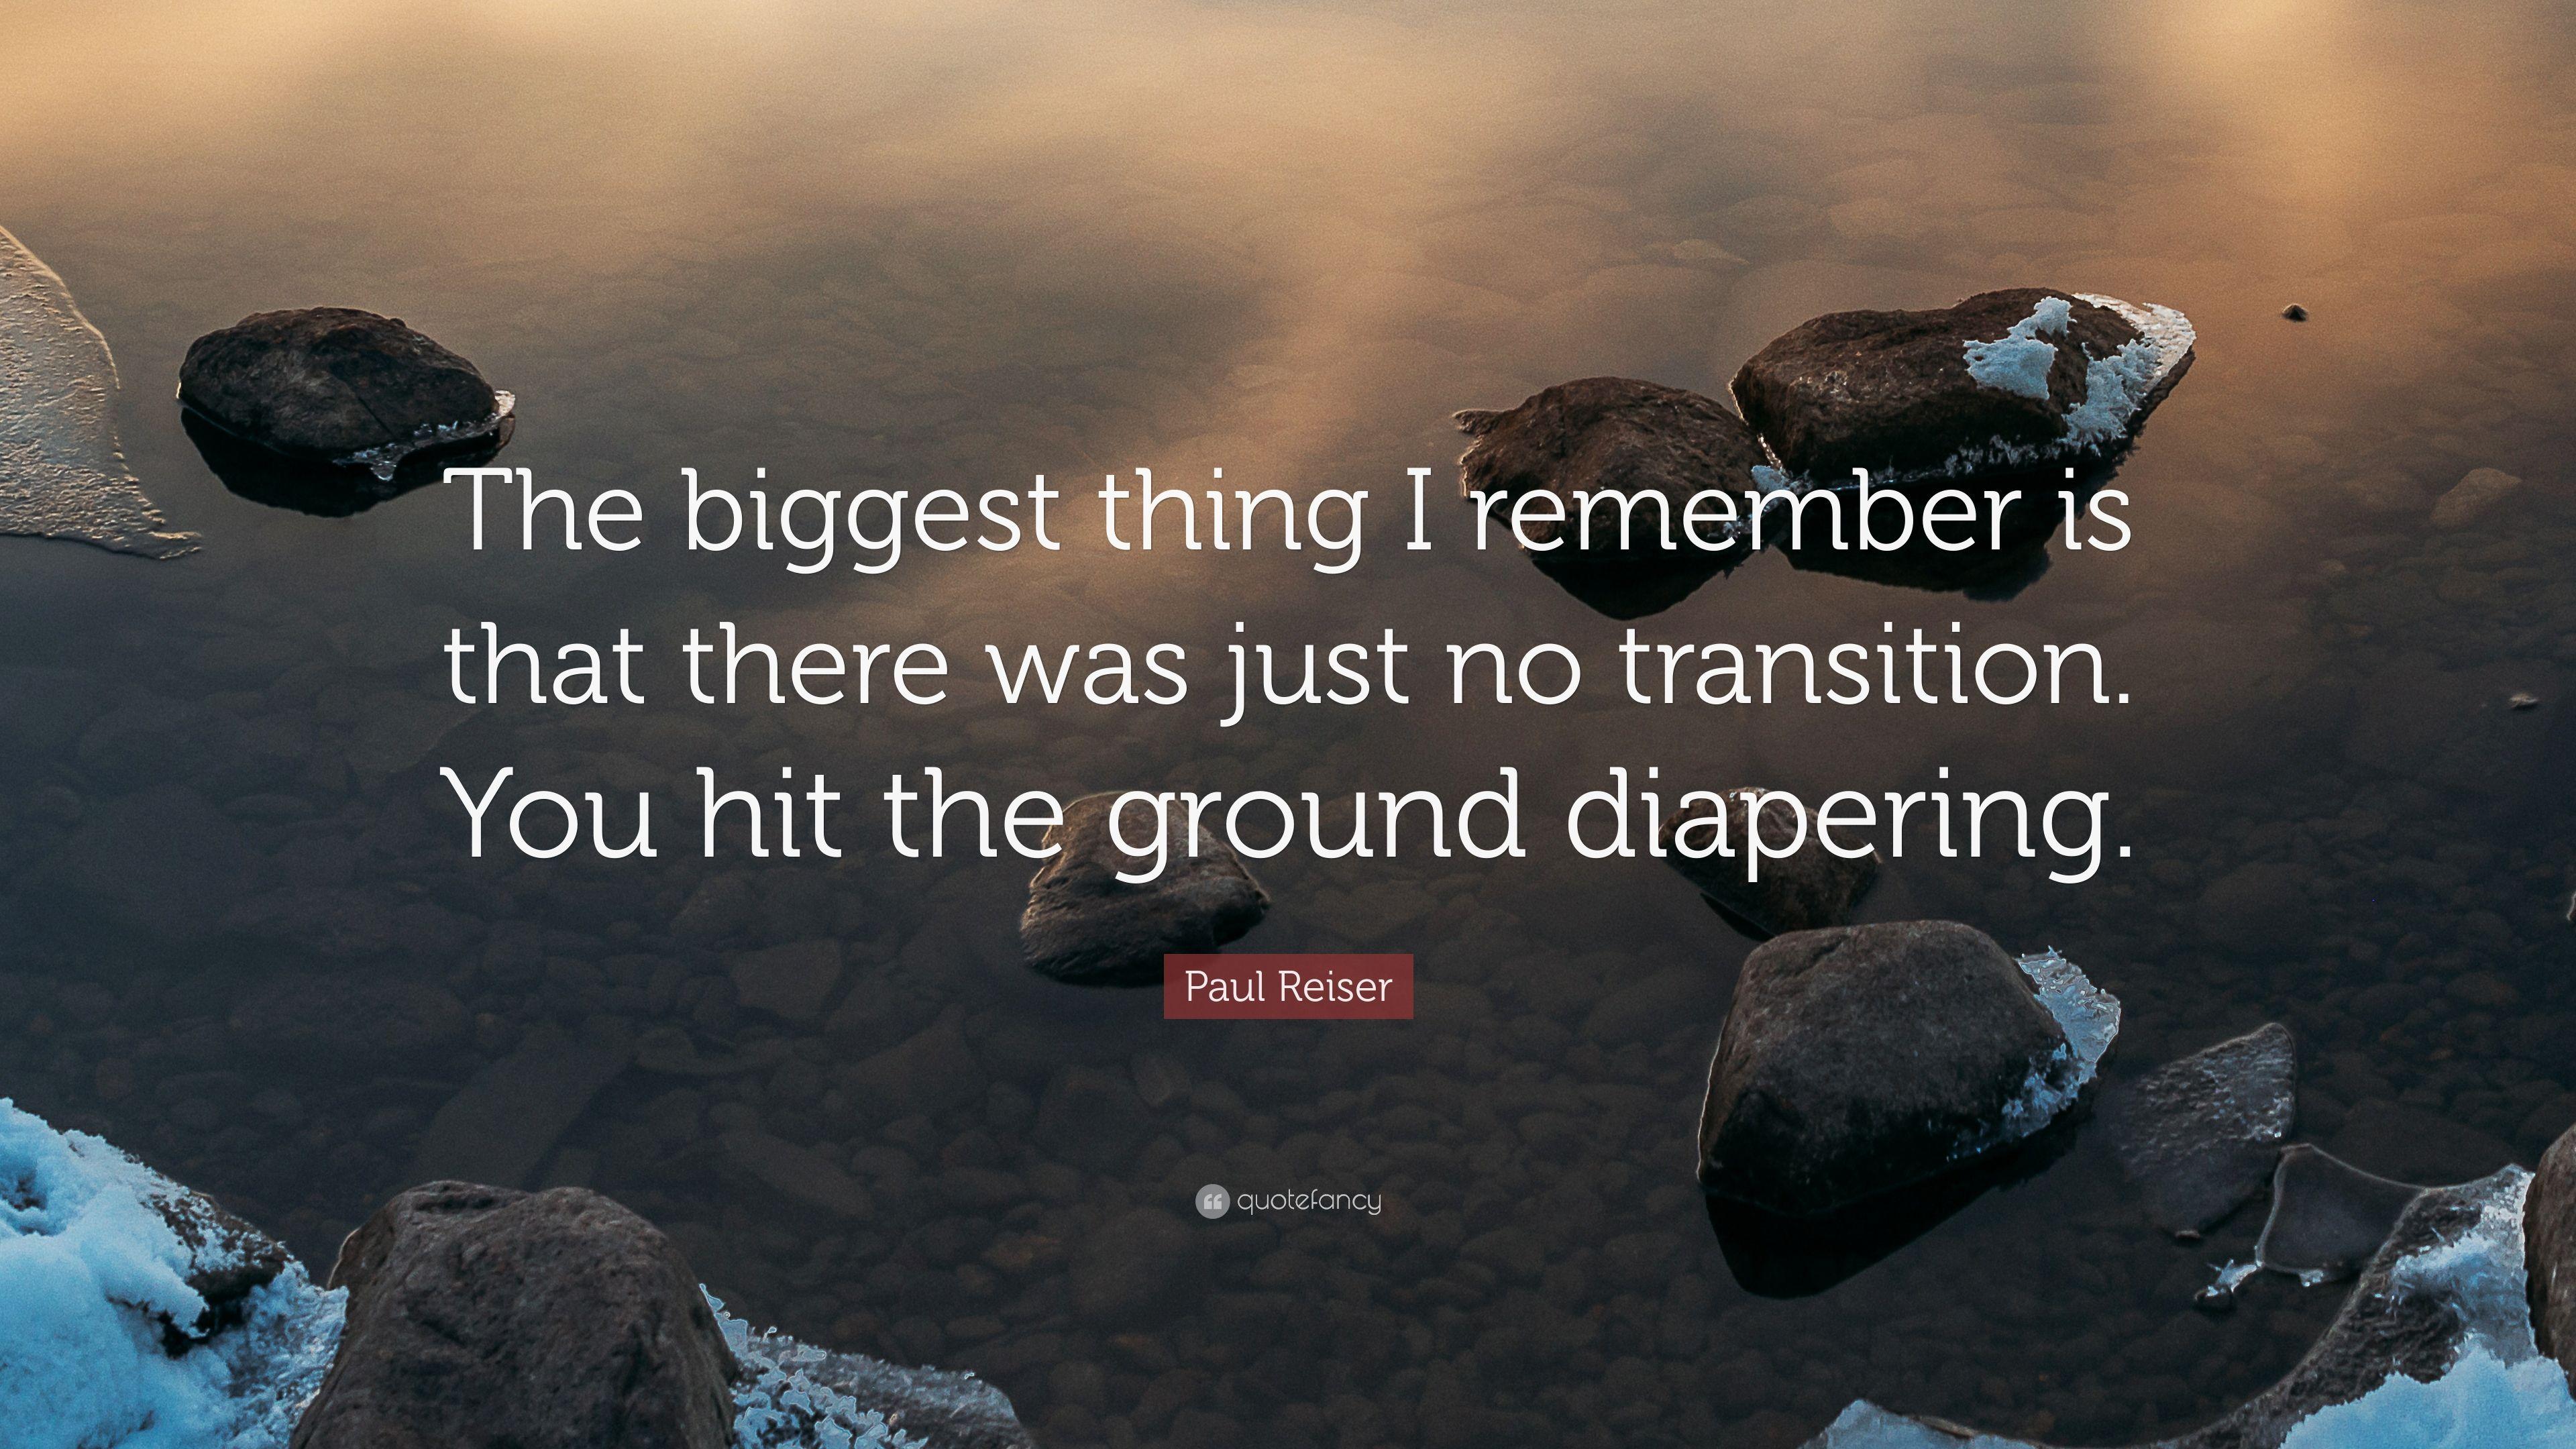 Paul Reiser Quote: “The biggest thing I remember is that there was